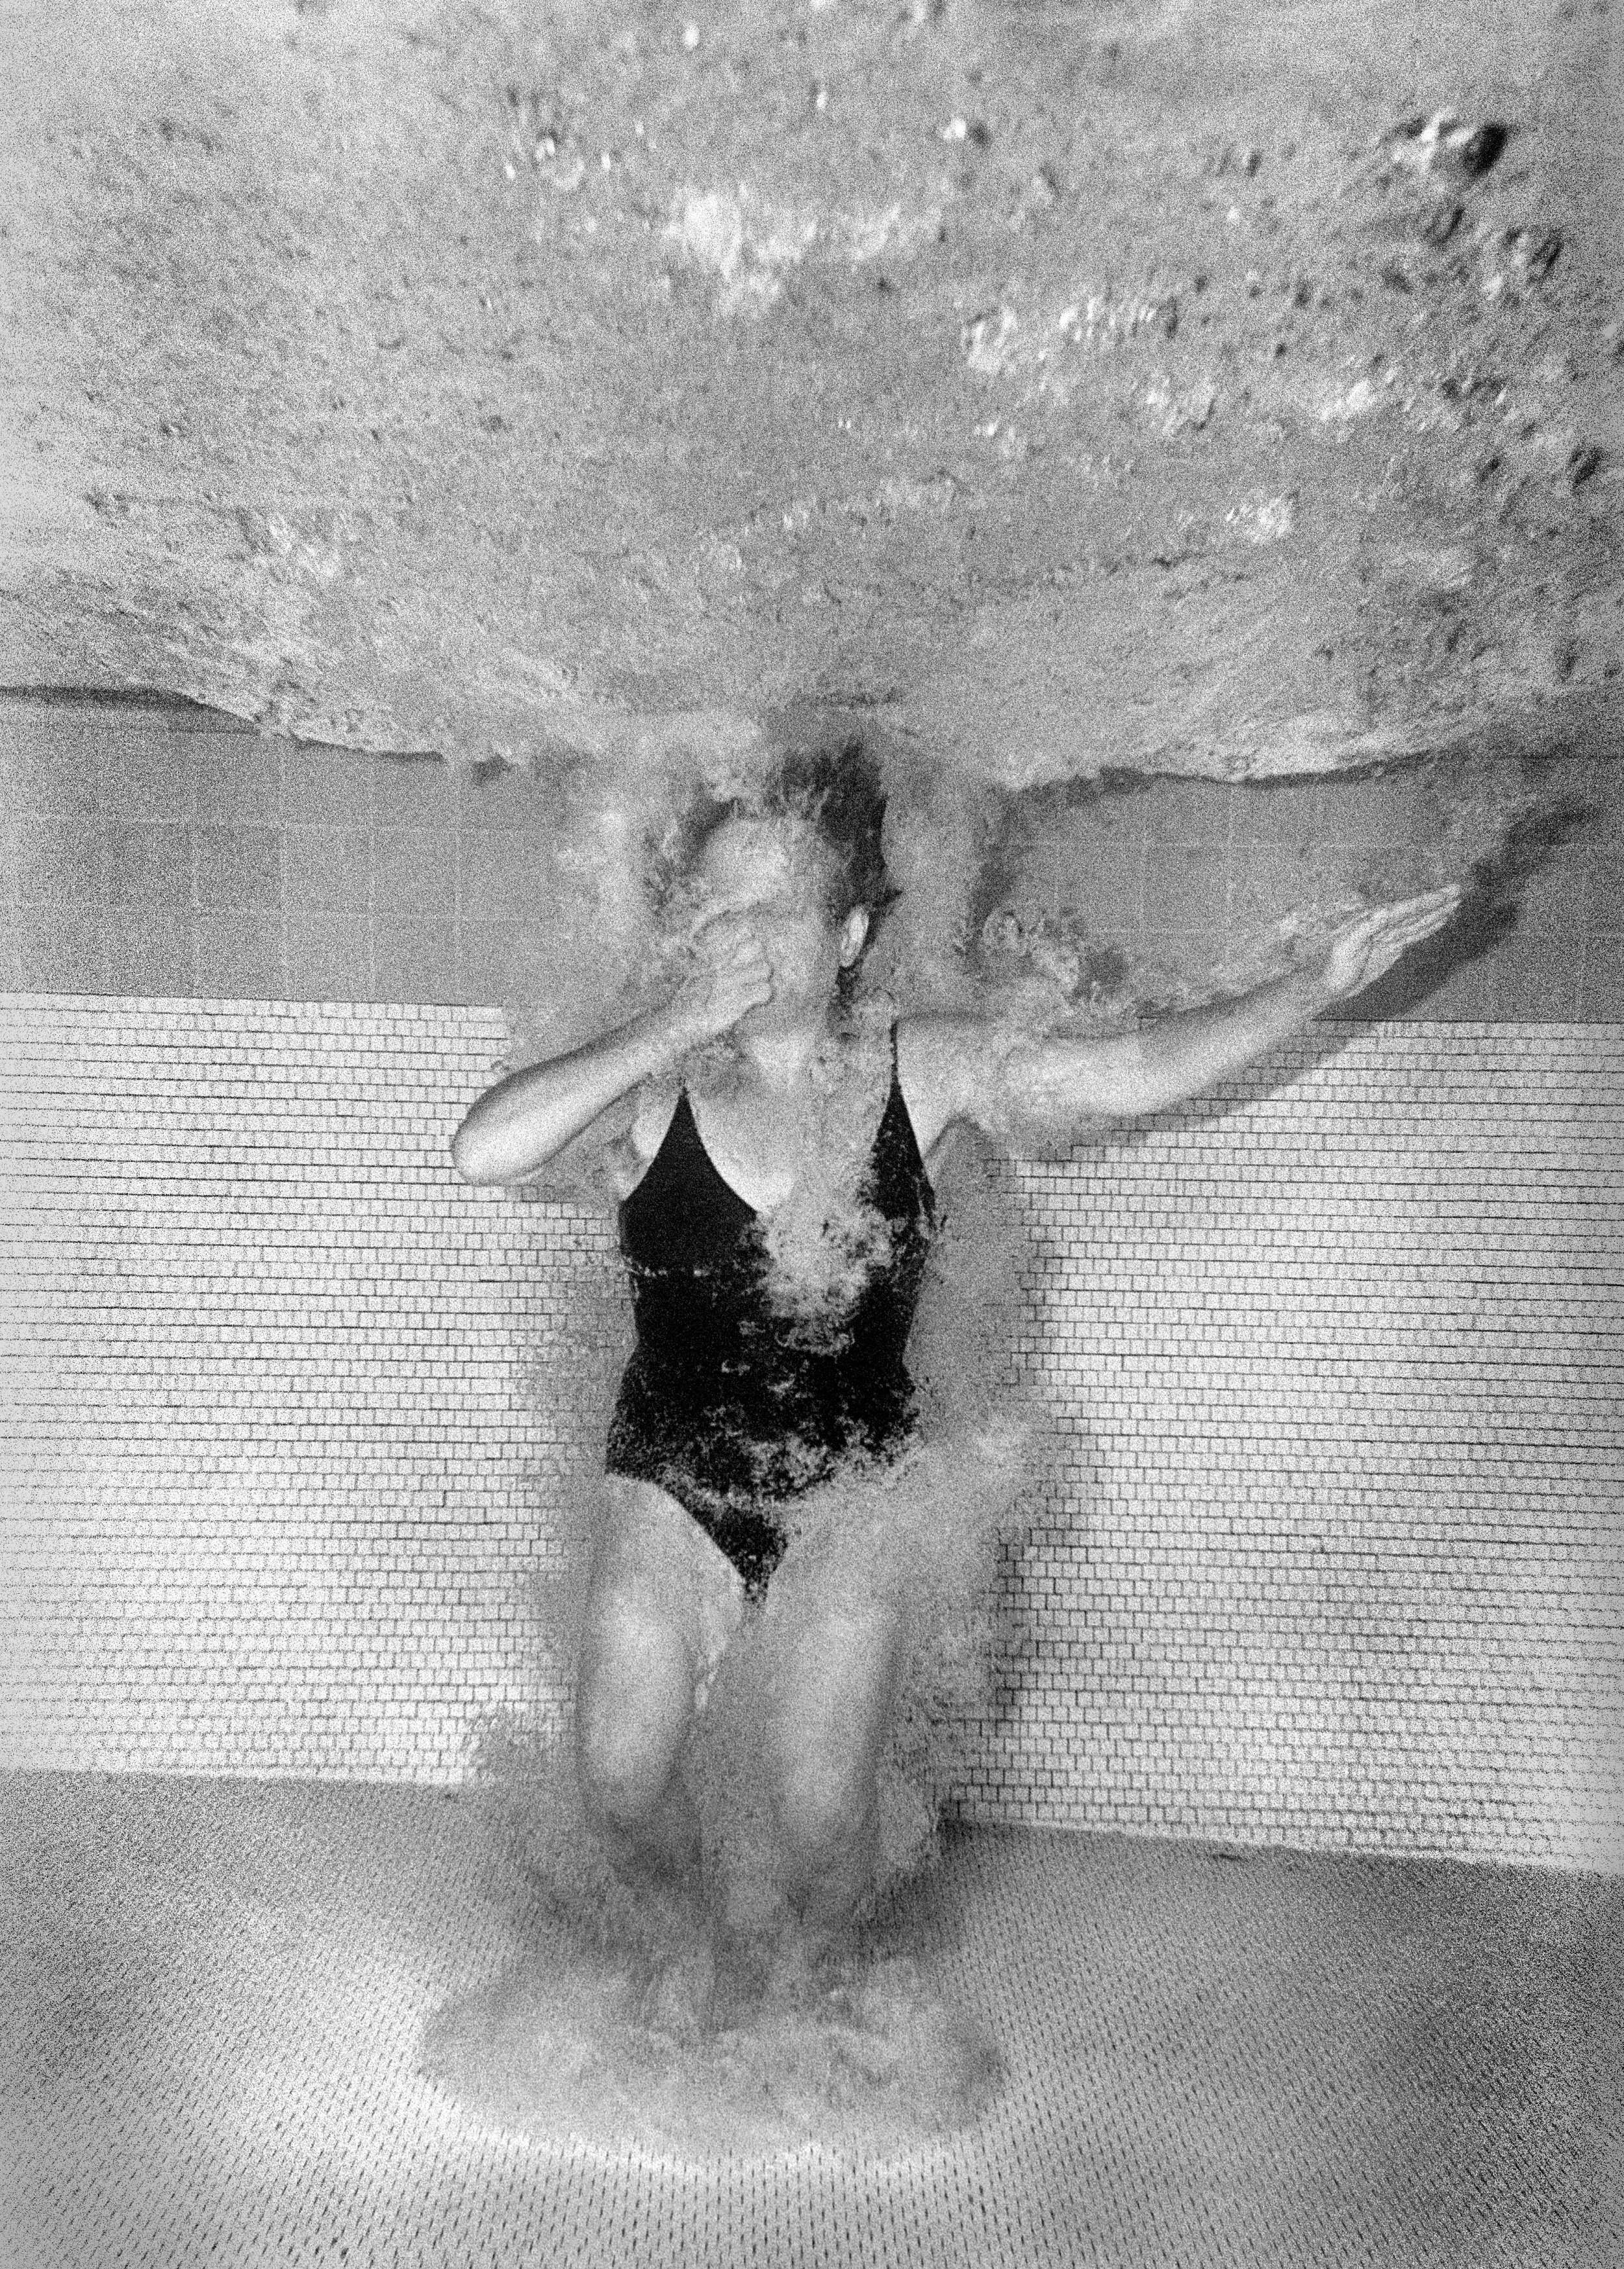  A class called Swimming for Adults Afraid of Water, in Berkeley. 1988 